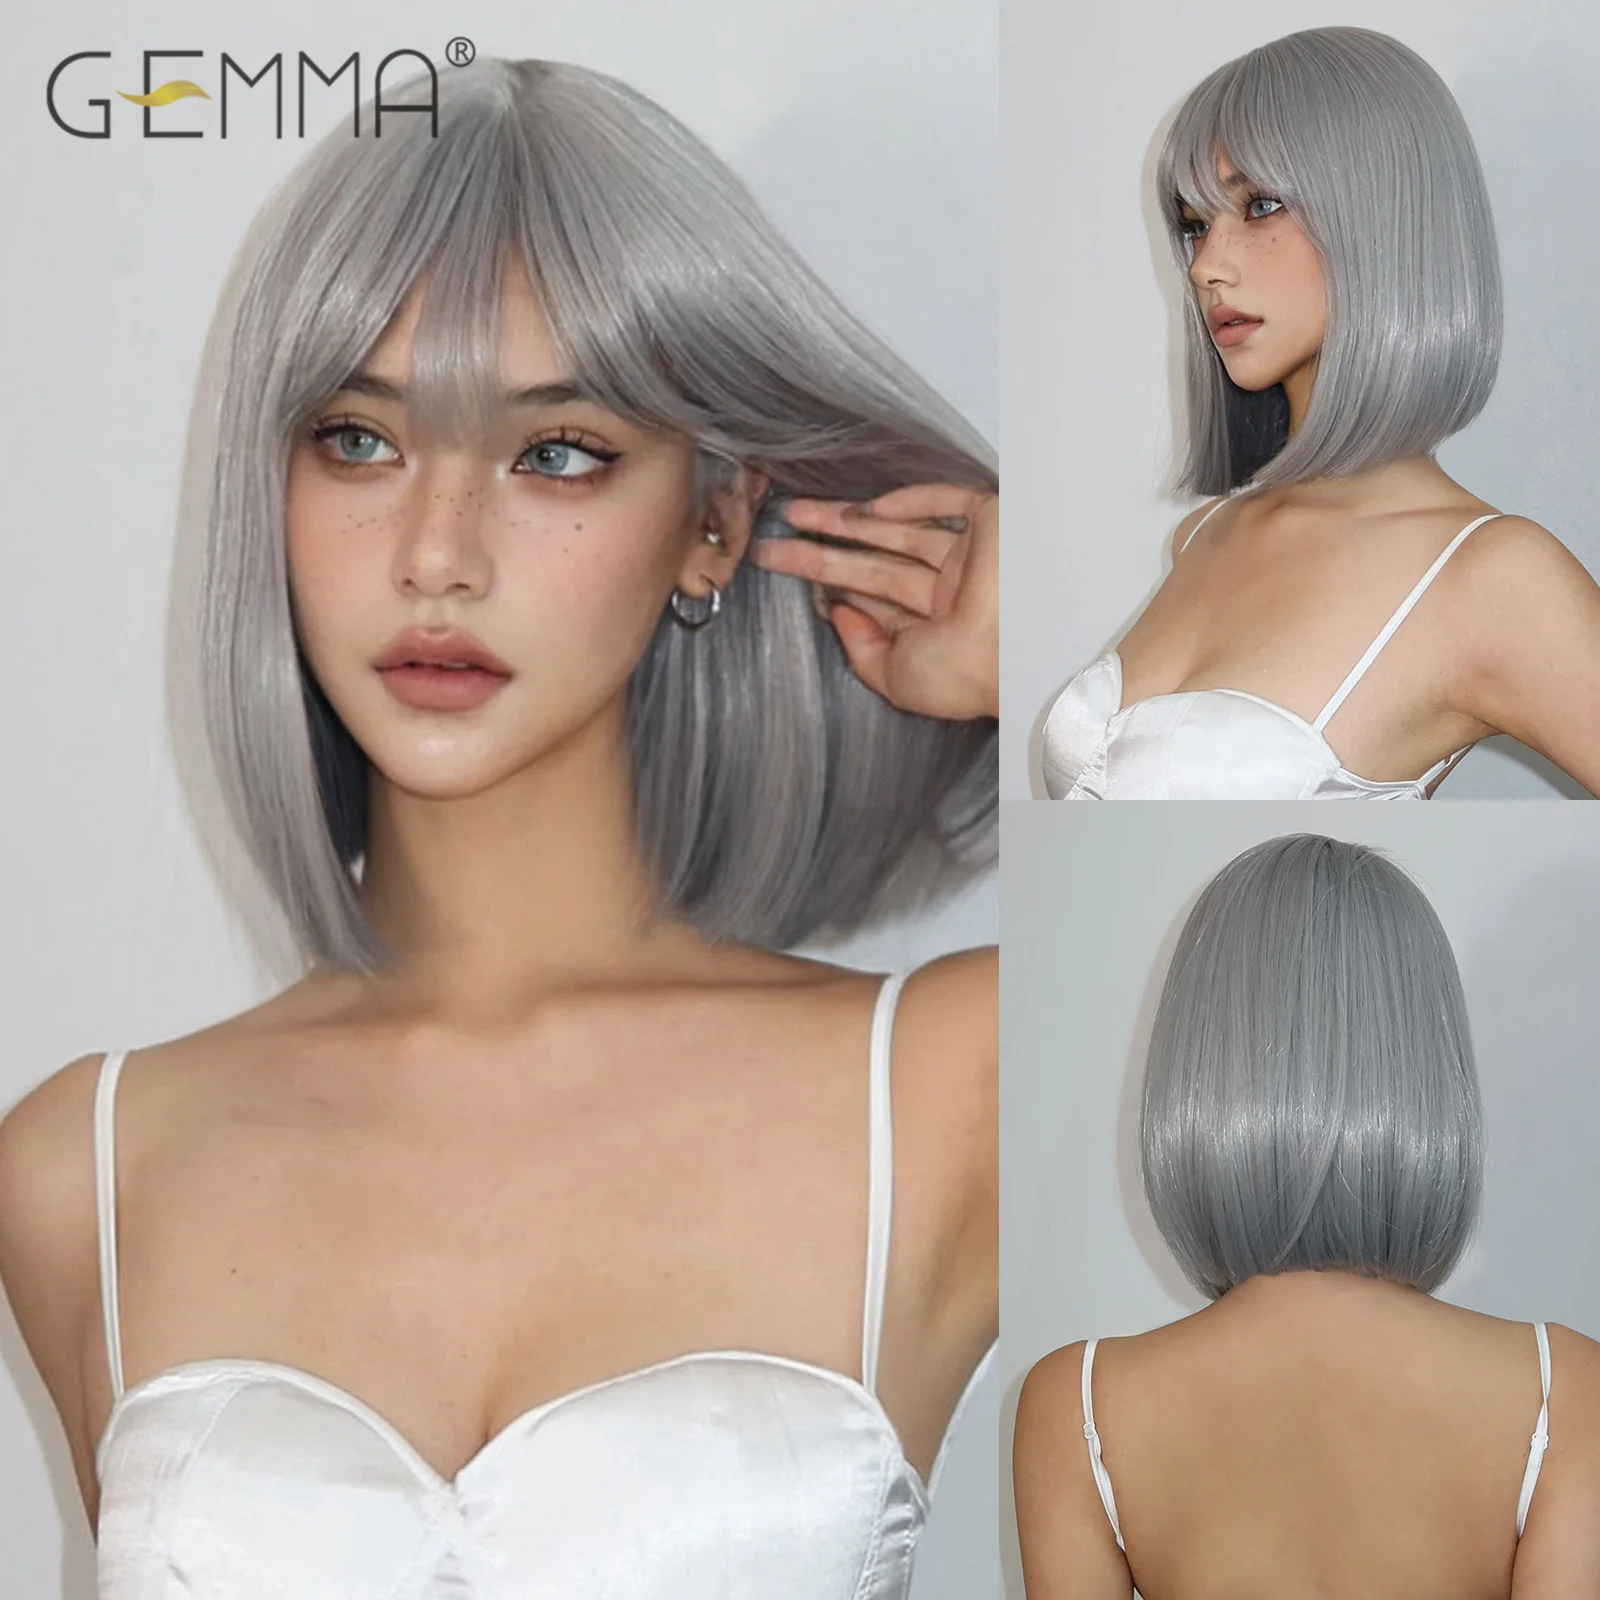 Silver Gray Short Straight Wig Synthetic Bob Wigs with Bangs for White Women Cosplay Daily Use Wig Natural Hair Heat Resistant black synthetic long wavy wig with fluffy bangs natural wave wigs for women cosplay daily use fake hair heat resistant fibre